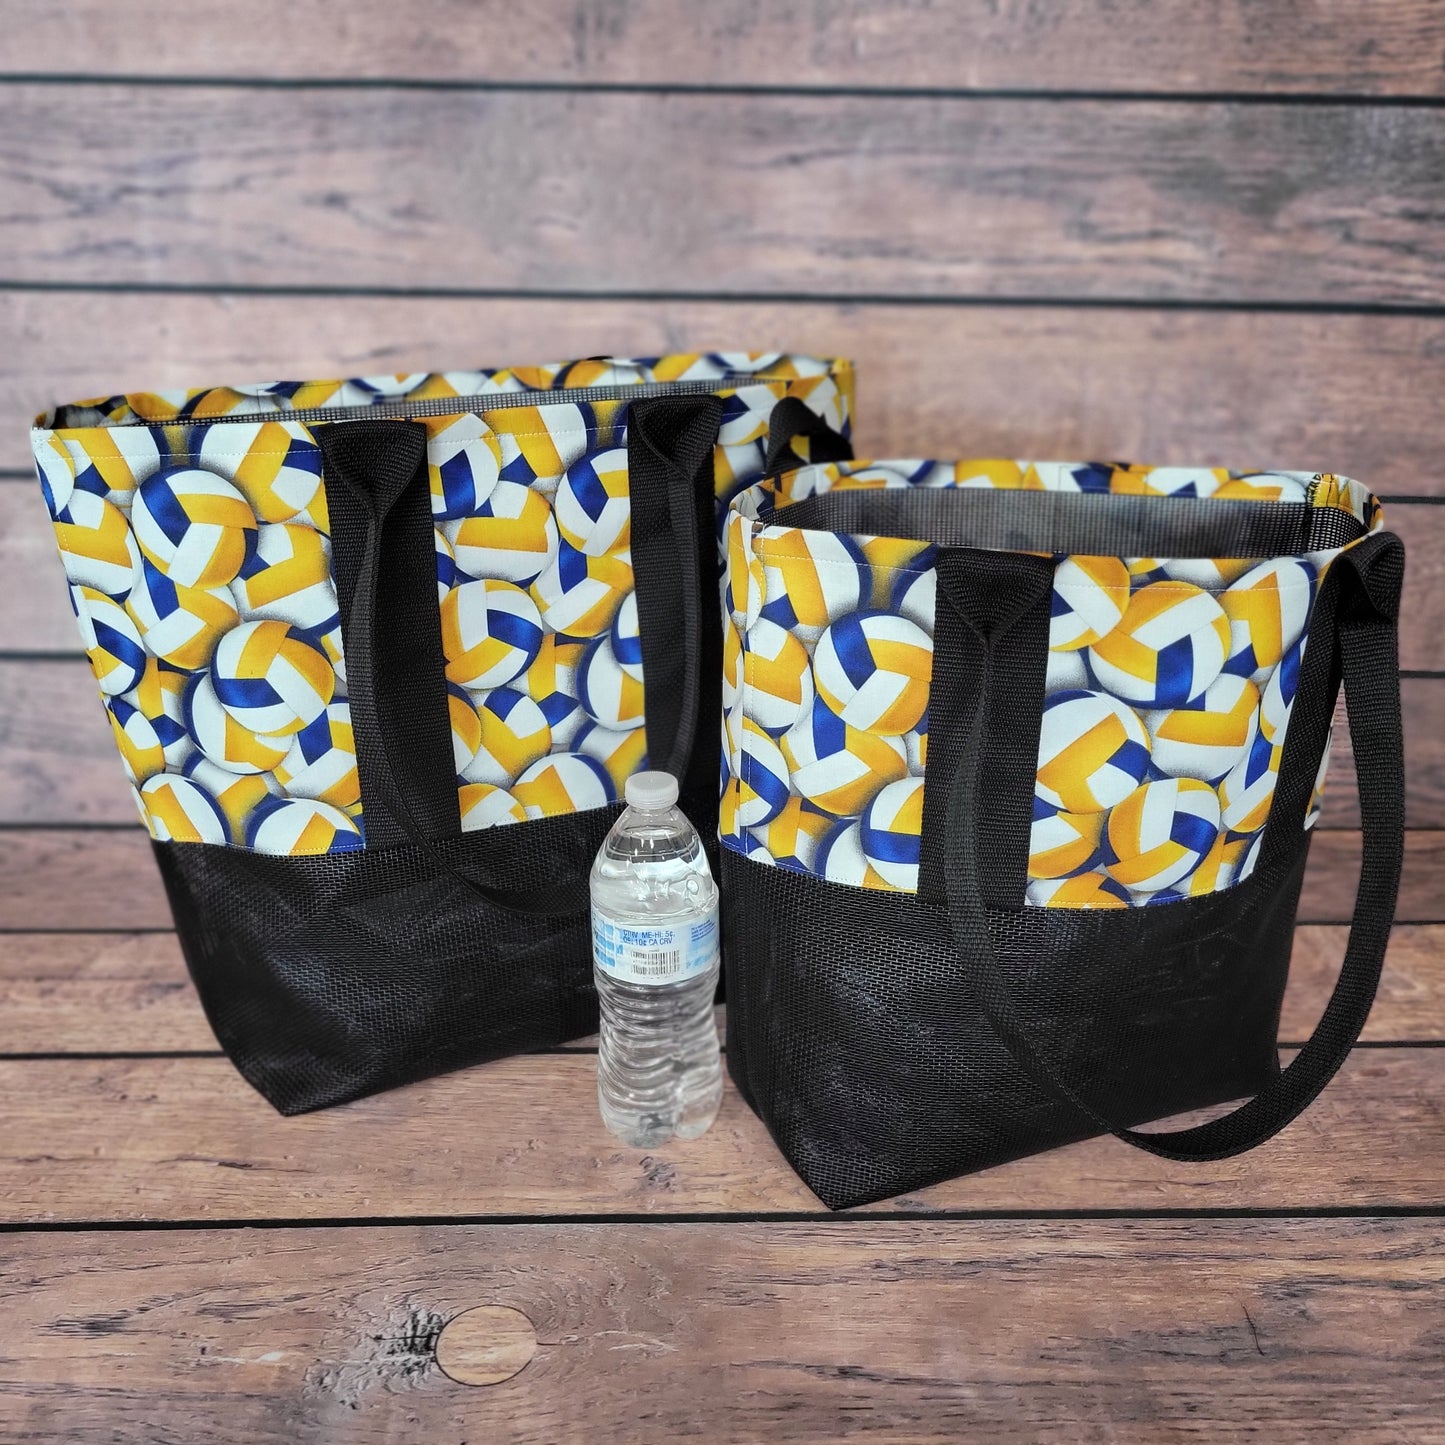 Jo Jo Ultimate Carry-All Tote Set [Volleyball]: Versatile Practicality for Every Occasion